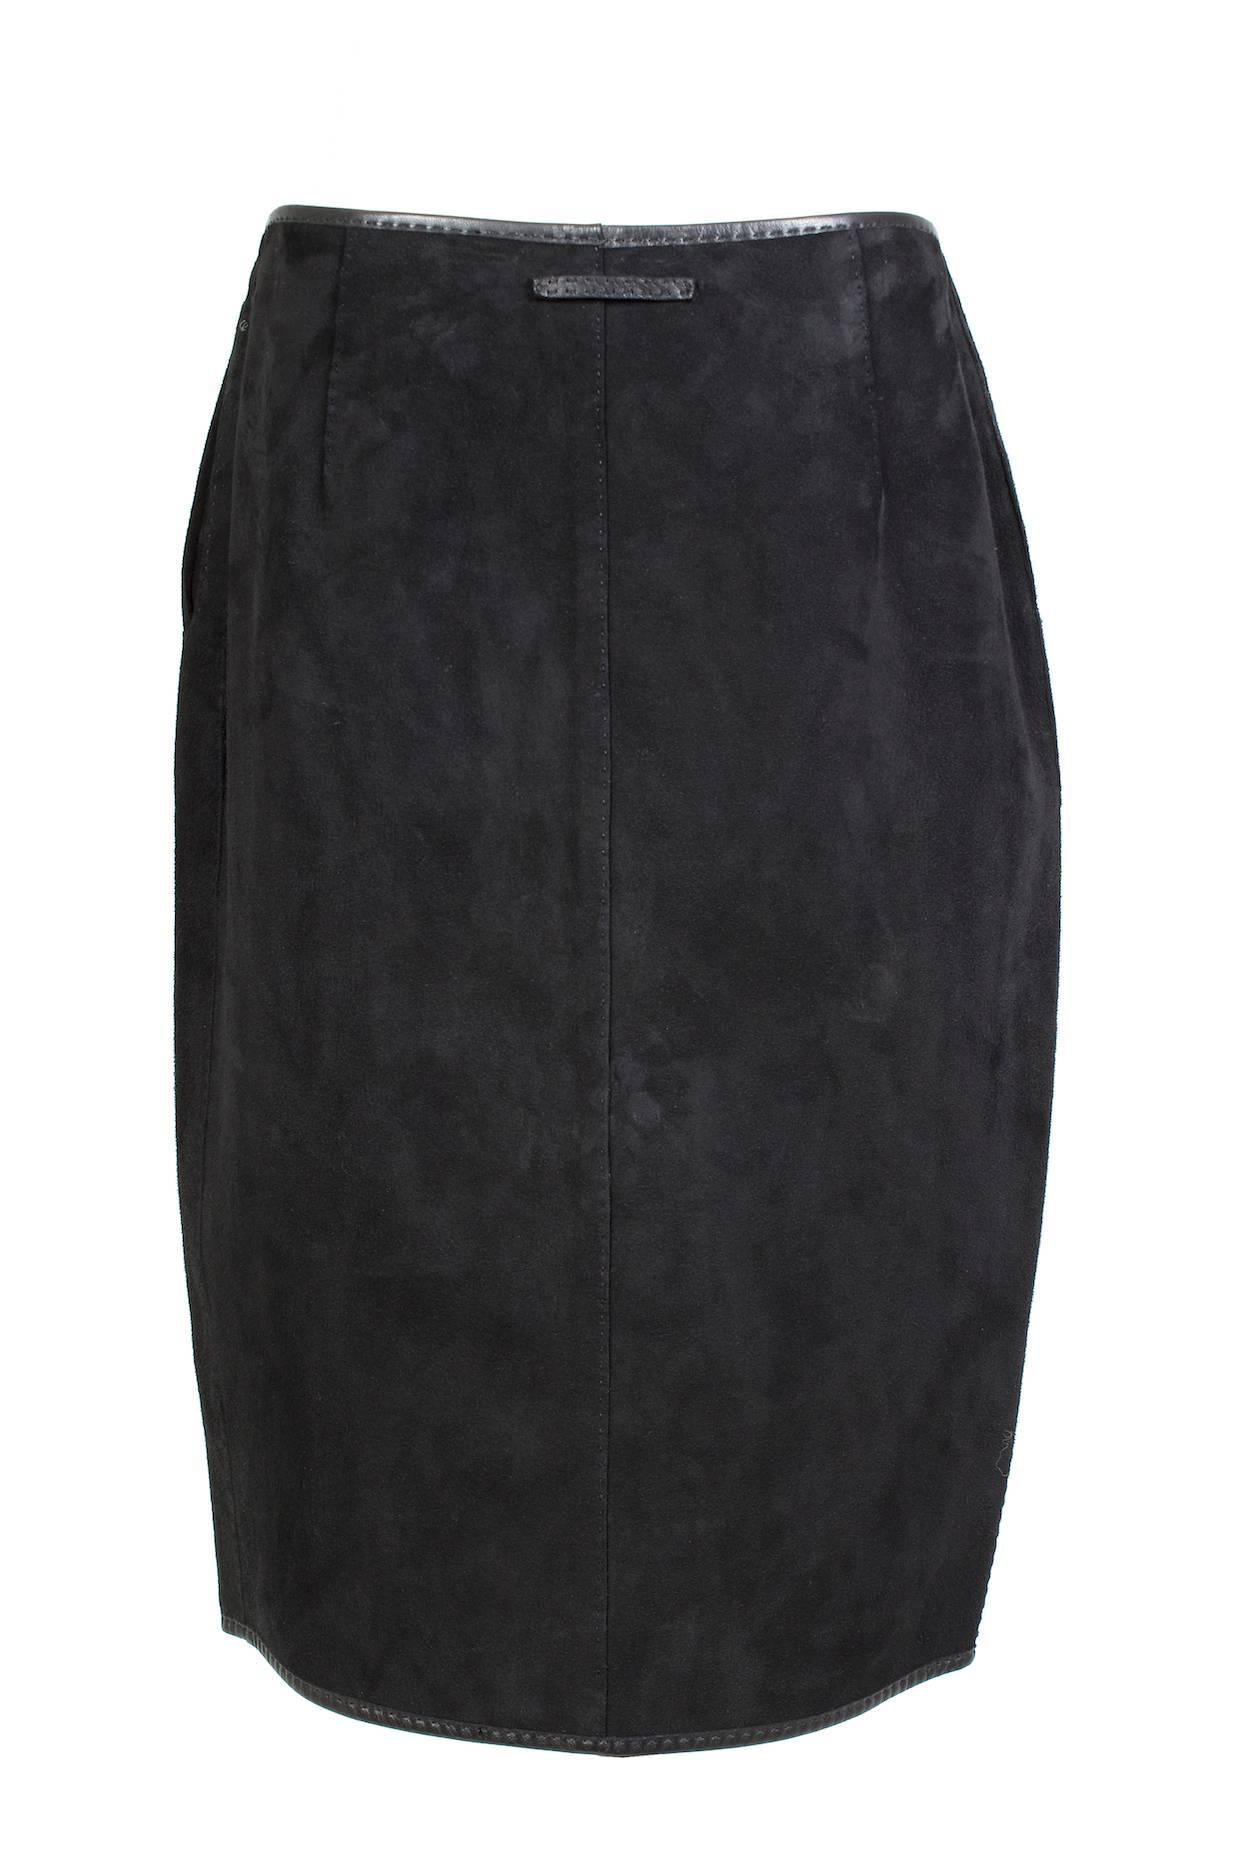 This is a black suede skirt by Jean Paul Gaultier circa 1990s.  It features black leather trim and has a full length double zipper down the front.  It also has twist lock closures down the center front which can be used to alter the shape and waist